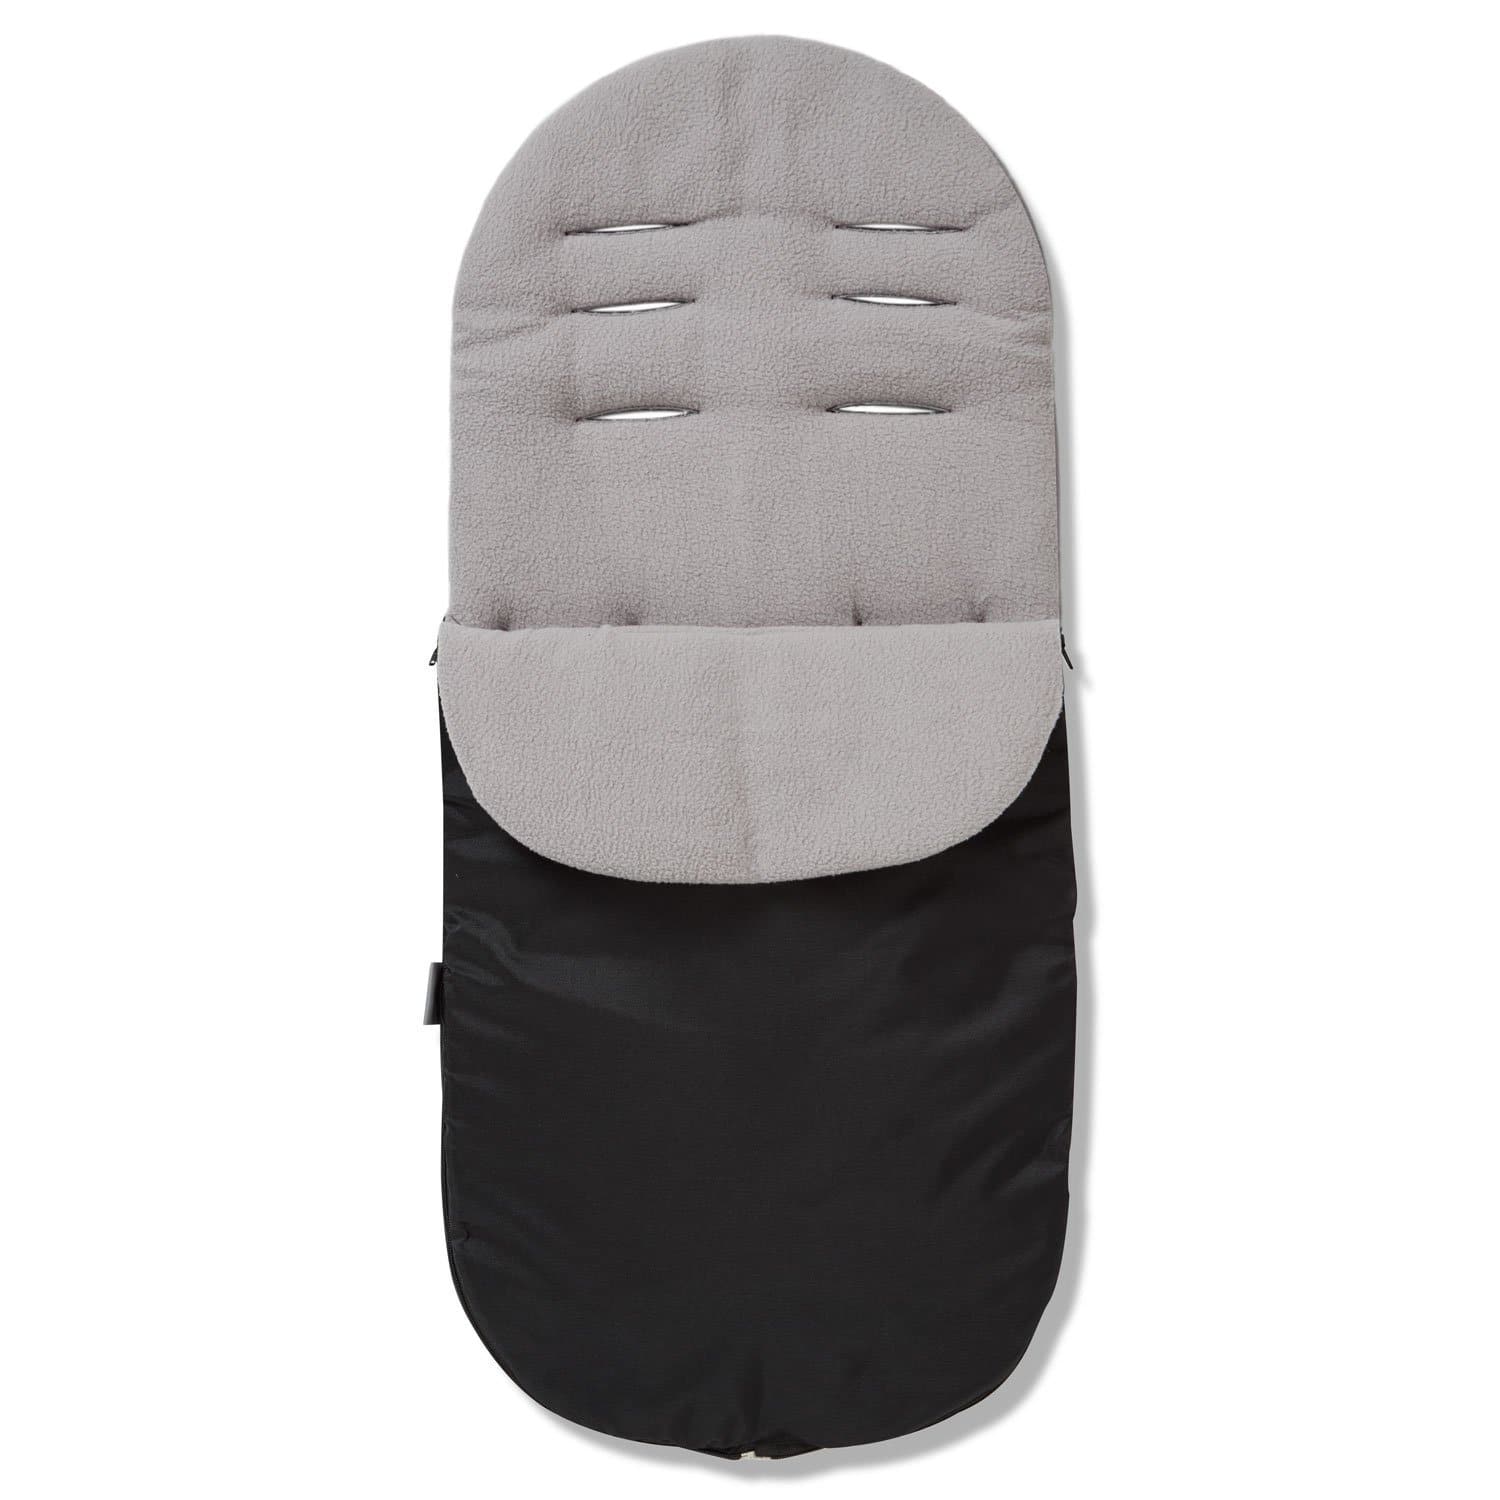 Footmuff / Cosy Toes Compatible with Kiddy - Grey / Fits All Models | For Your Little One